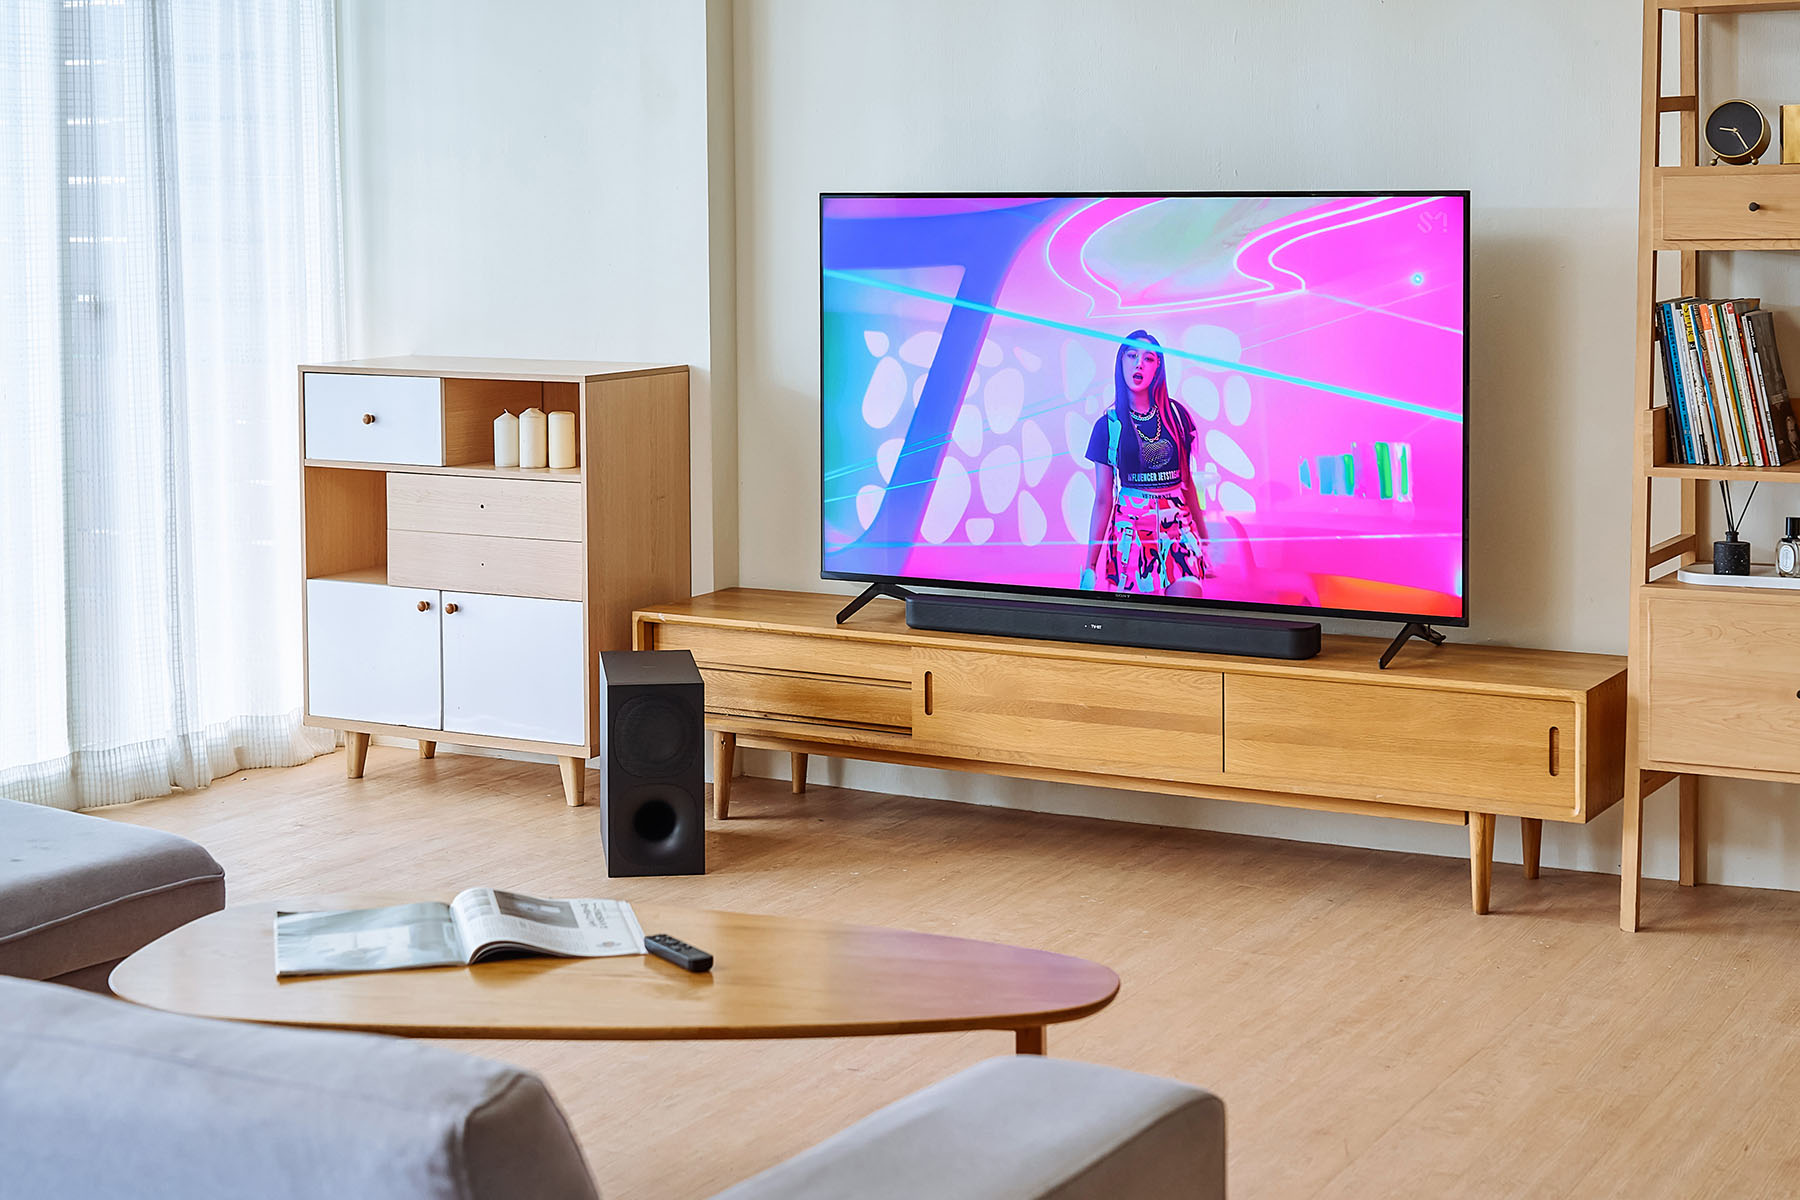 The soundbar of HT-S400 and the subwoofer are connected wirelessly and need to be connected to the power supply respectively, which allows the placement of the subwoofer more freely, and when adjusting the phase of the subwoofer, there is no need to worry about wiring. line problem.